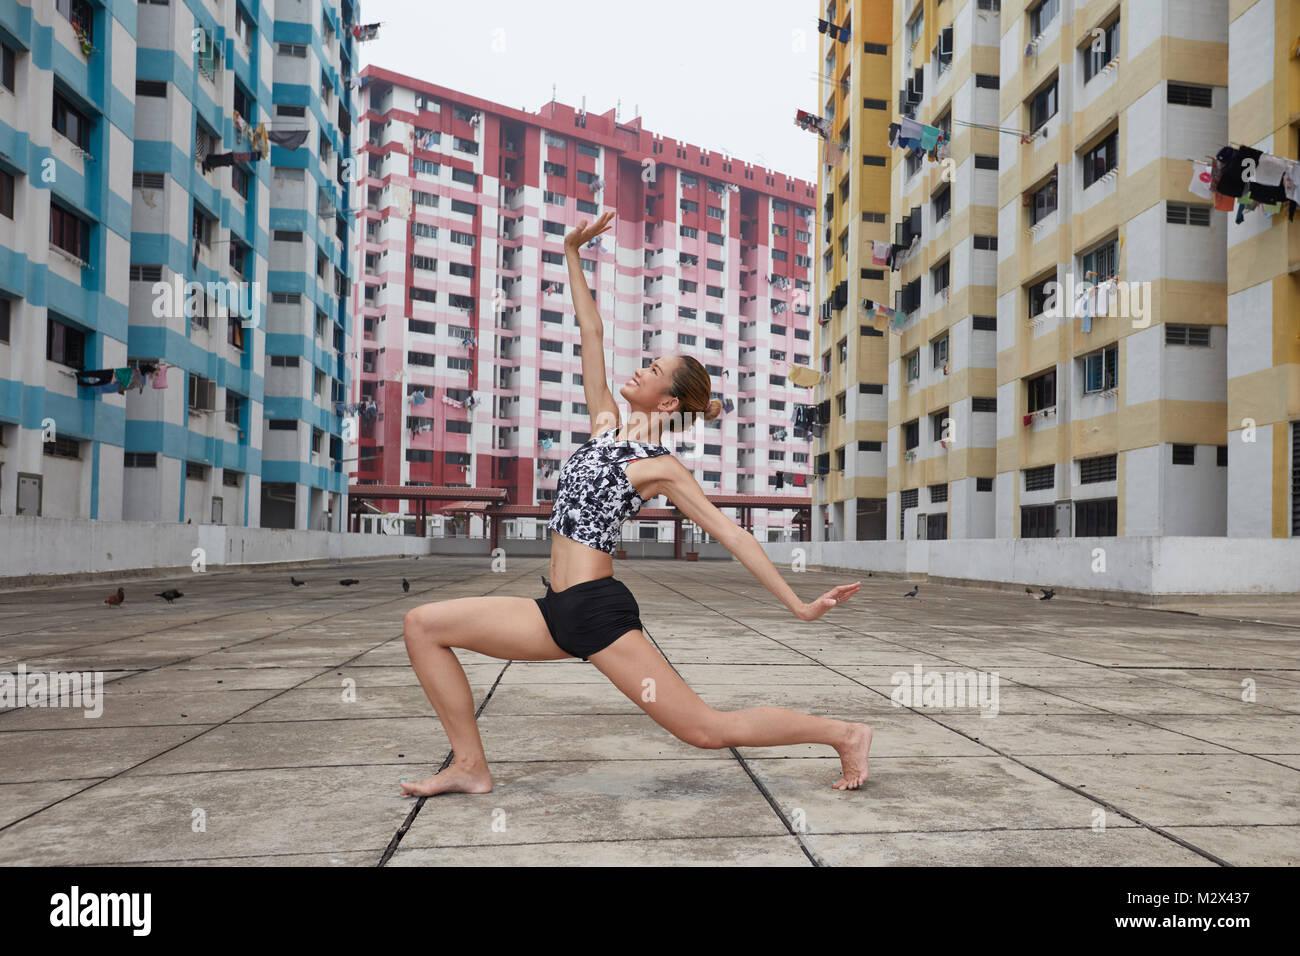 Young female dancer dancing in the city with colourful buildings in the background in Singapore. Stock Photo